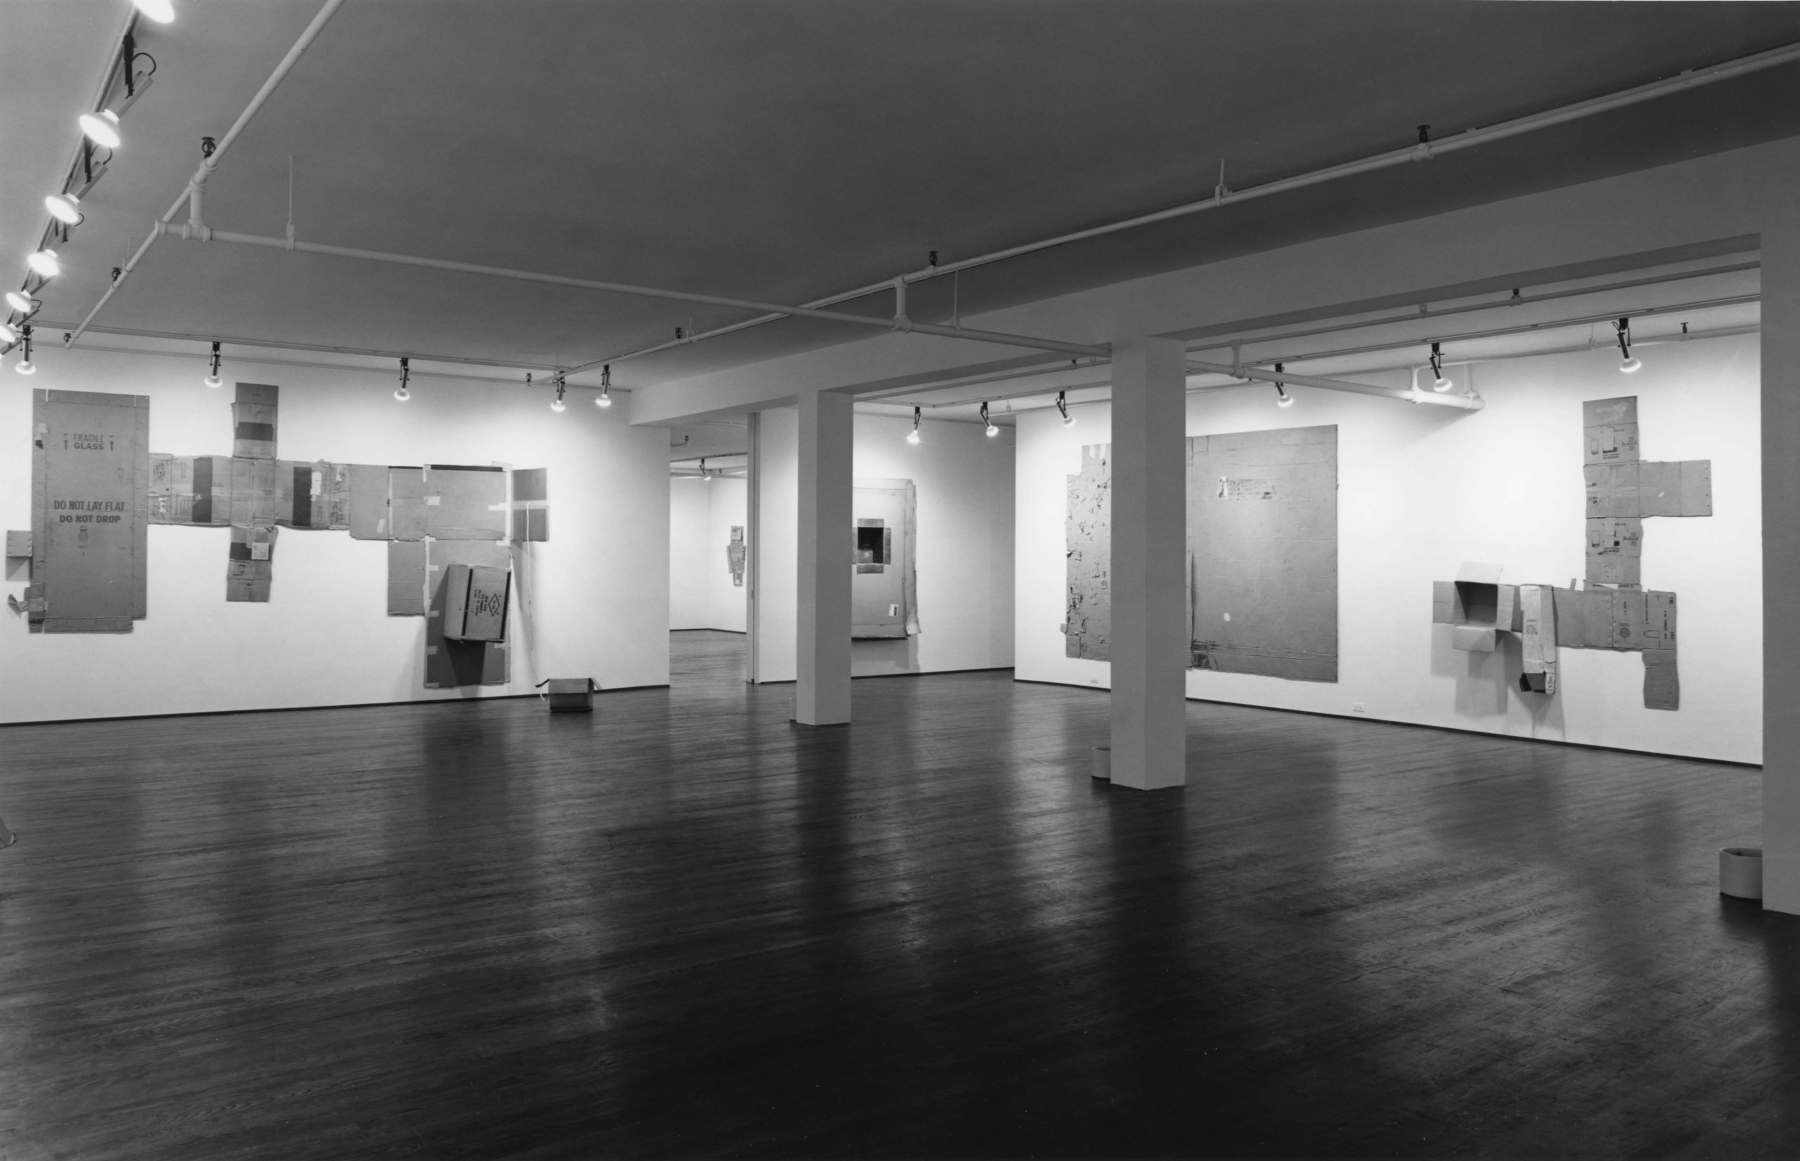 Installation view of Robert Rauschenberg: Cardboards, at Leo Castelli, New York, 1971, with Castelli / Small Turtle Bowl (Cardboards) (1971) second from right (pages 24-25). Image Castelli Gallery, New York. Photo by Geoffrey Clements.&amp;nbsp;